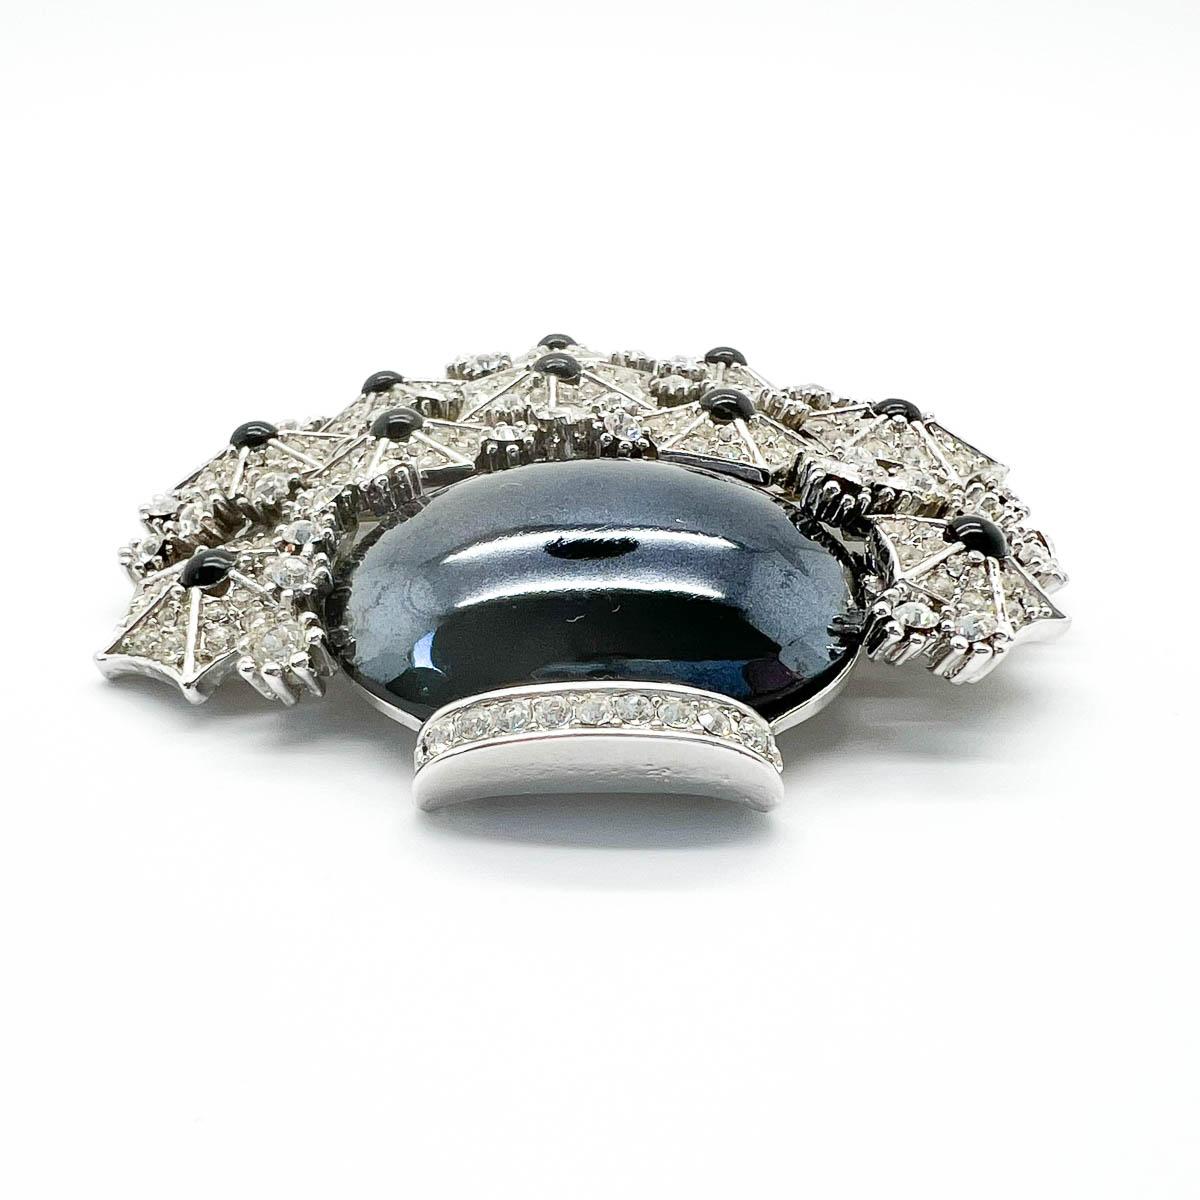 Vintage Cristobal Statement Giardinetti Brooch 1990s In Good Condition For Sale In Wilmslow, GB